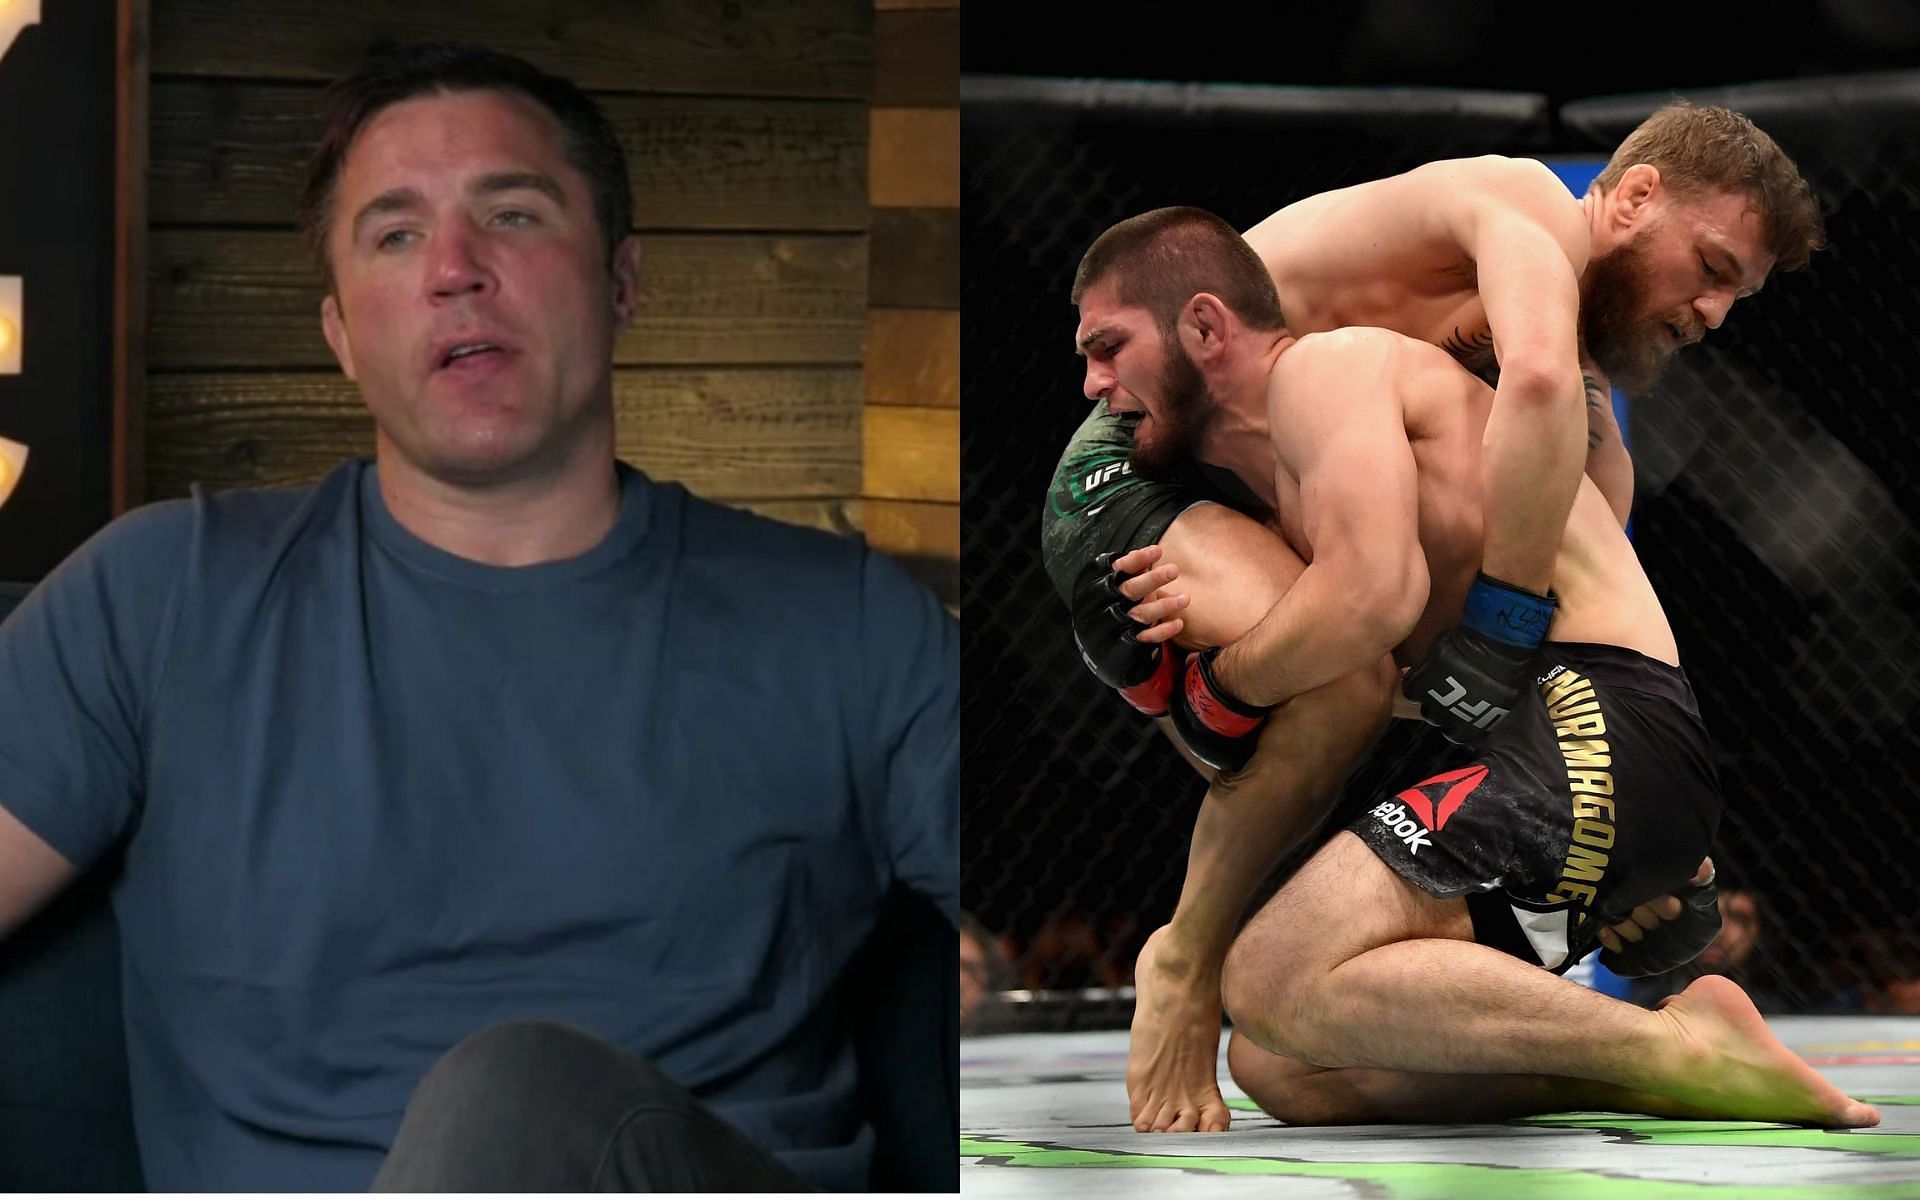 UFC News - Chael Sonnen explains why Conor McGregor when he said Khabib Nurmagomedov's legacy is good, not great